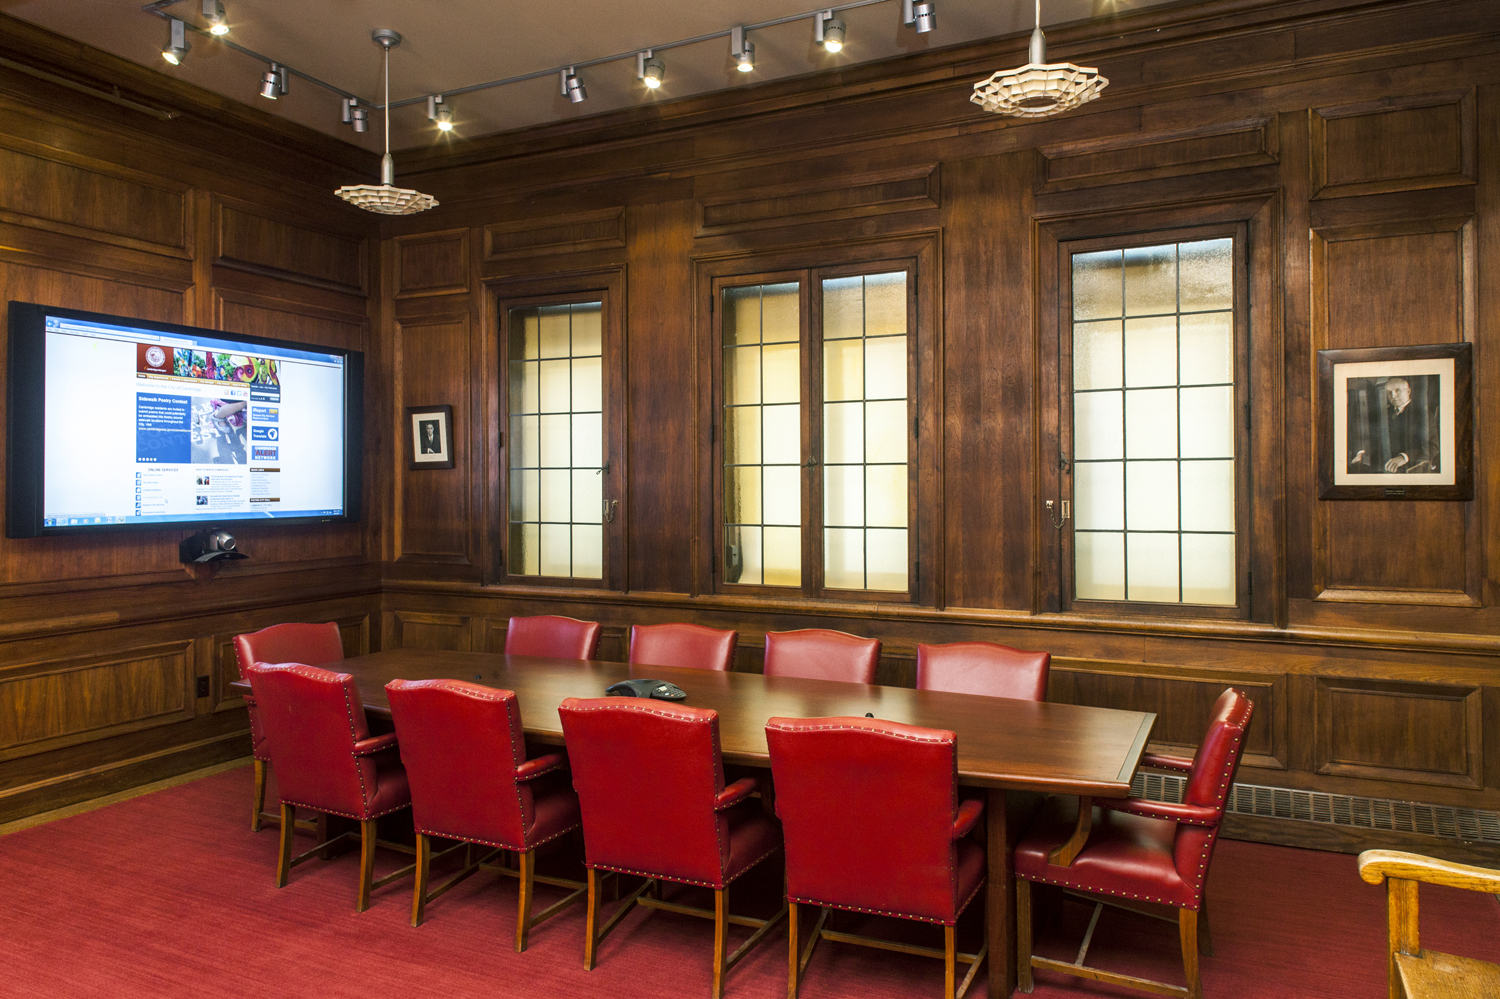 Cambridge City hall conference room with teleconferencing capability